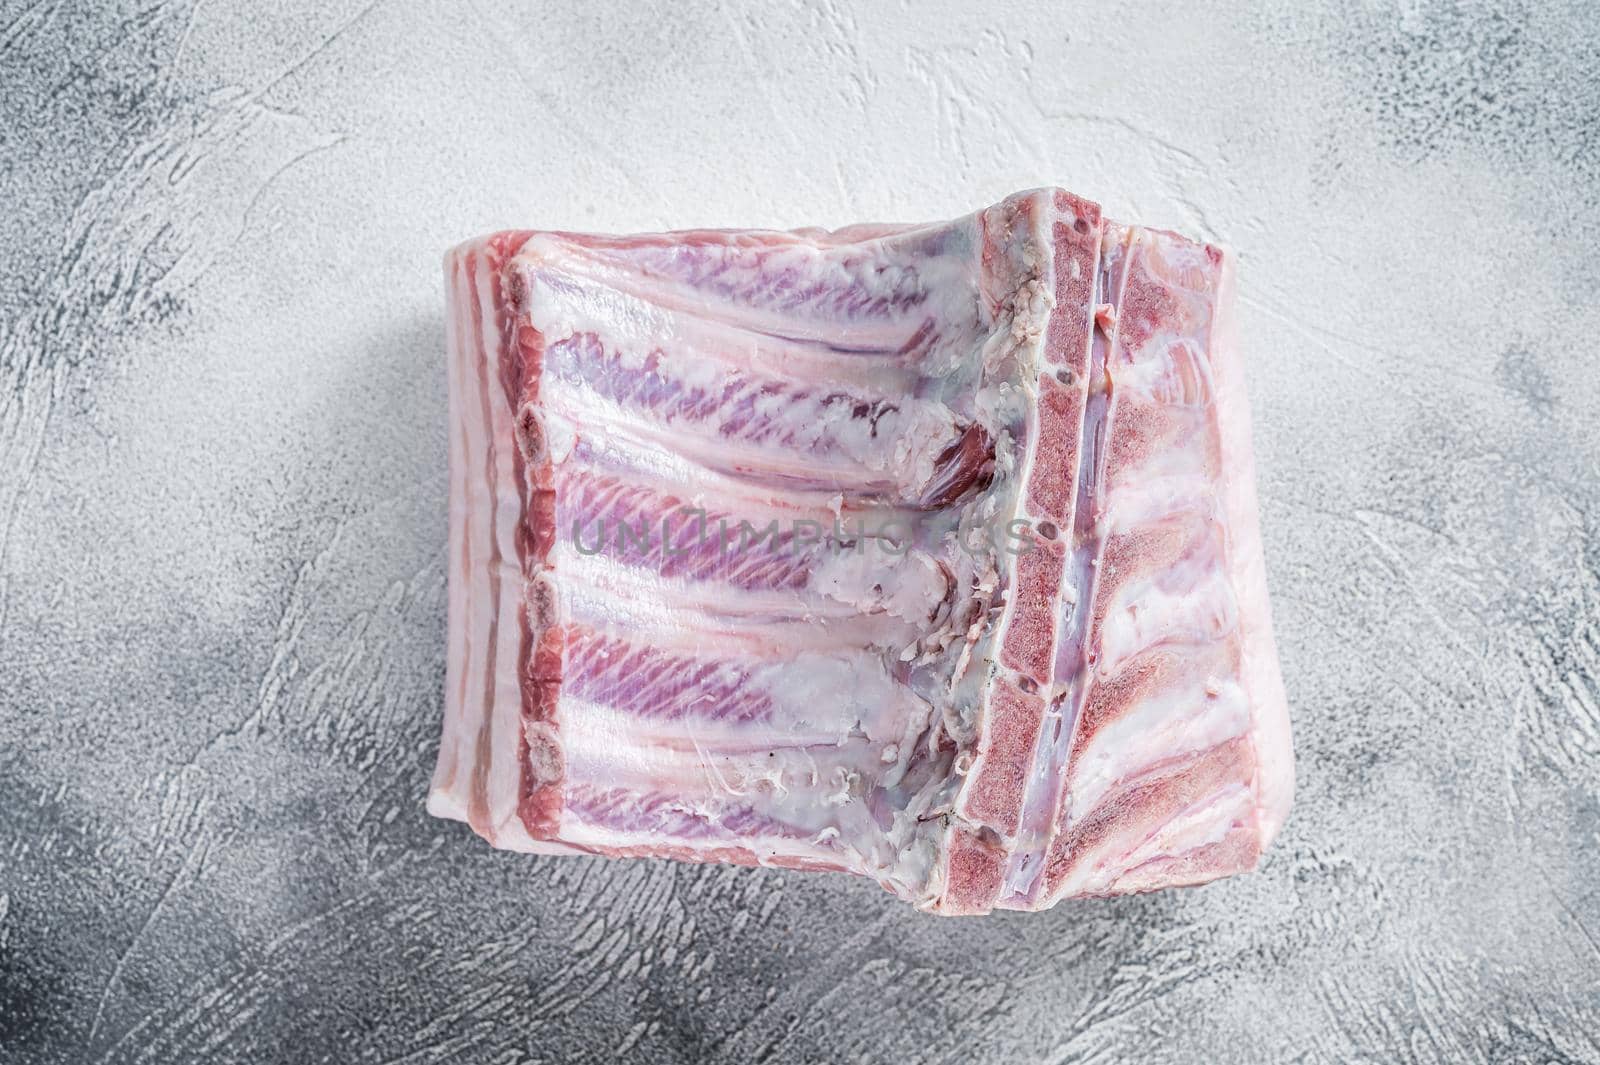 Raw whole rack of pork loin with ribs on kitchen table. White background. Top view by Composter